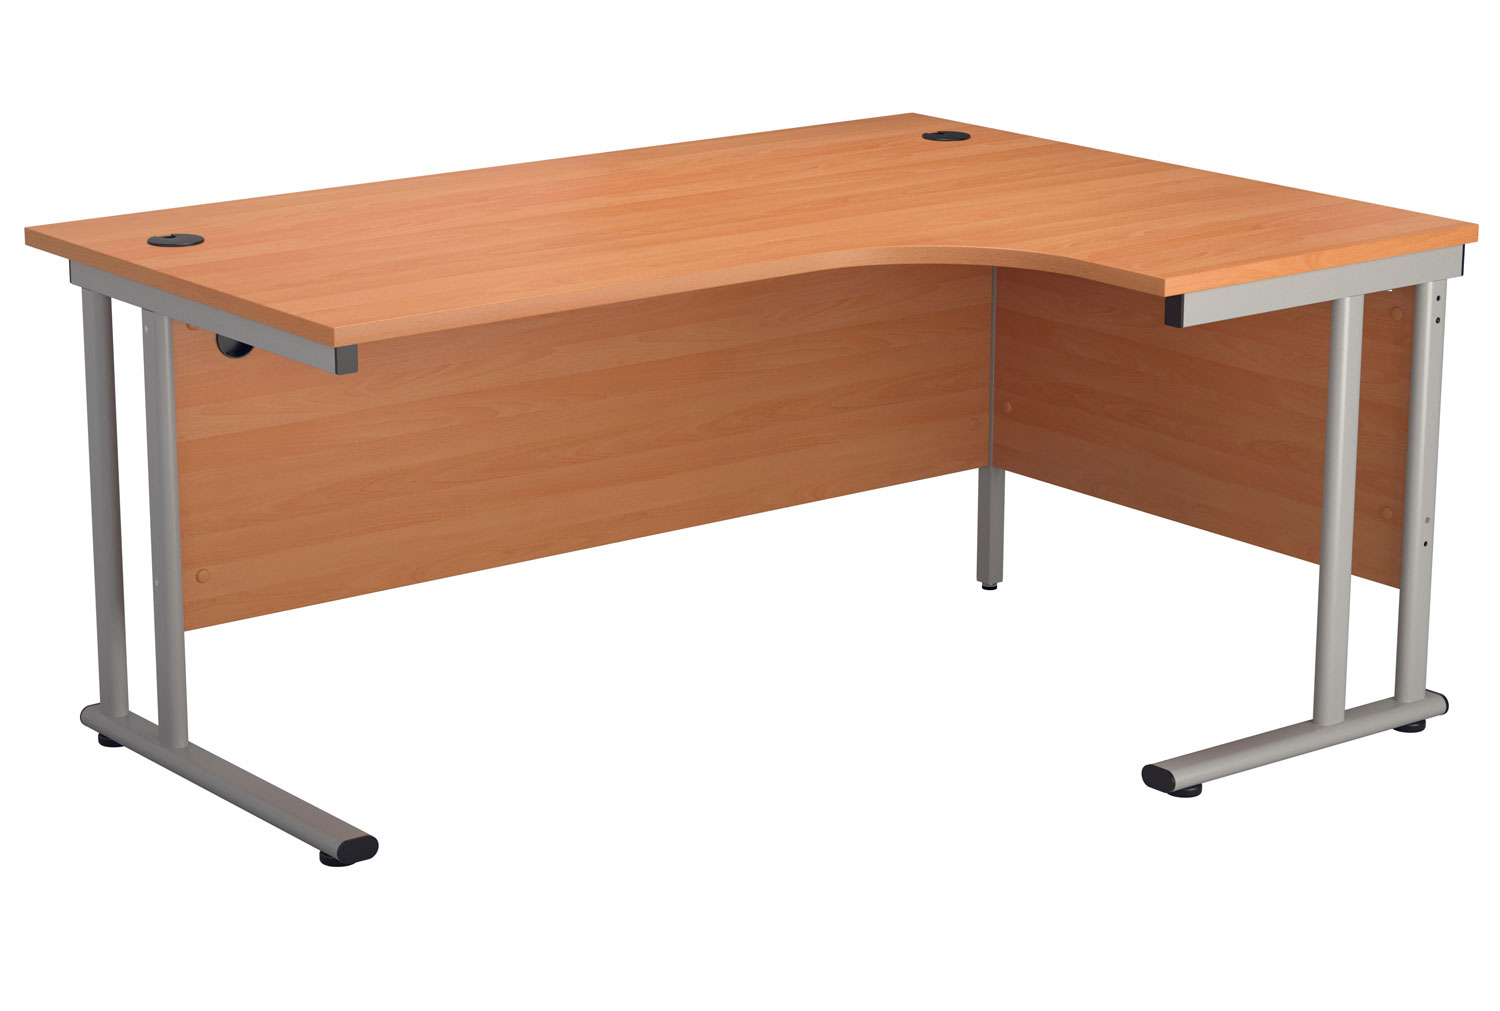 Impulse Right Hand Ergonomic Office Desk, 160wx120/80dx73h (cm), Silver Frame, Warm Beech, Express Delivery